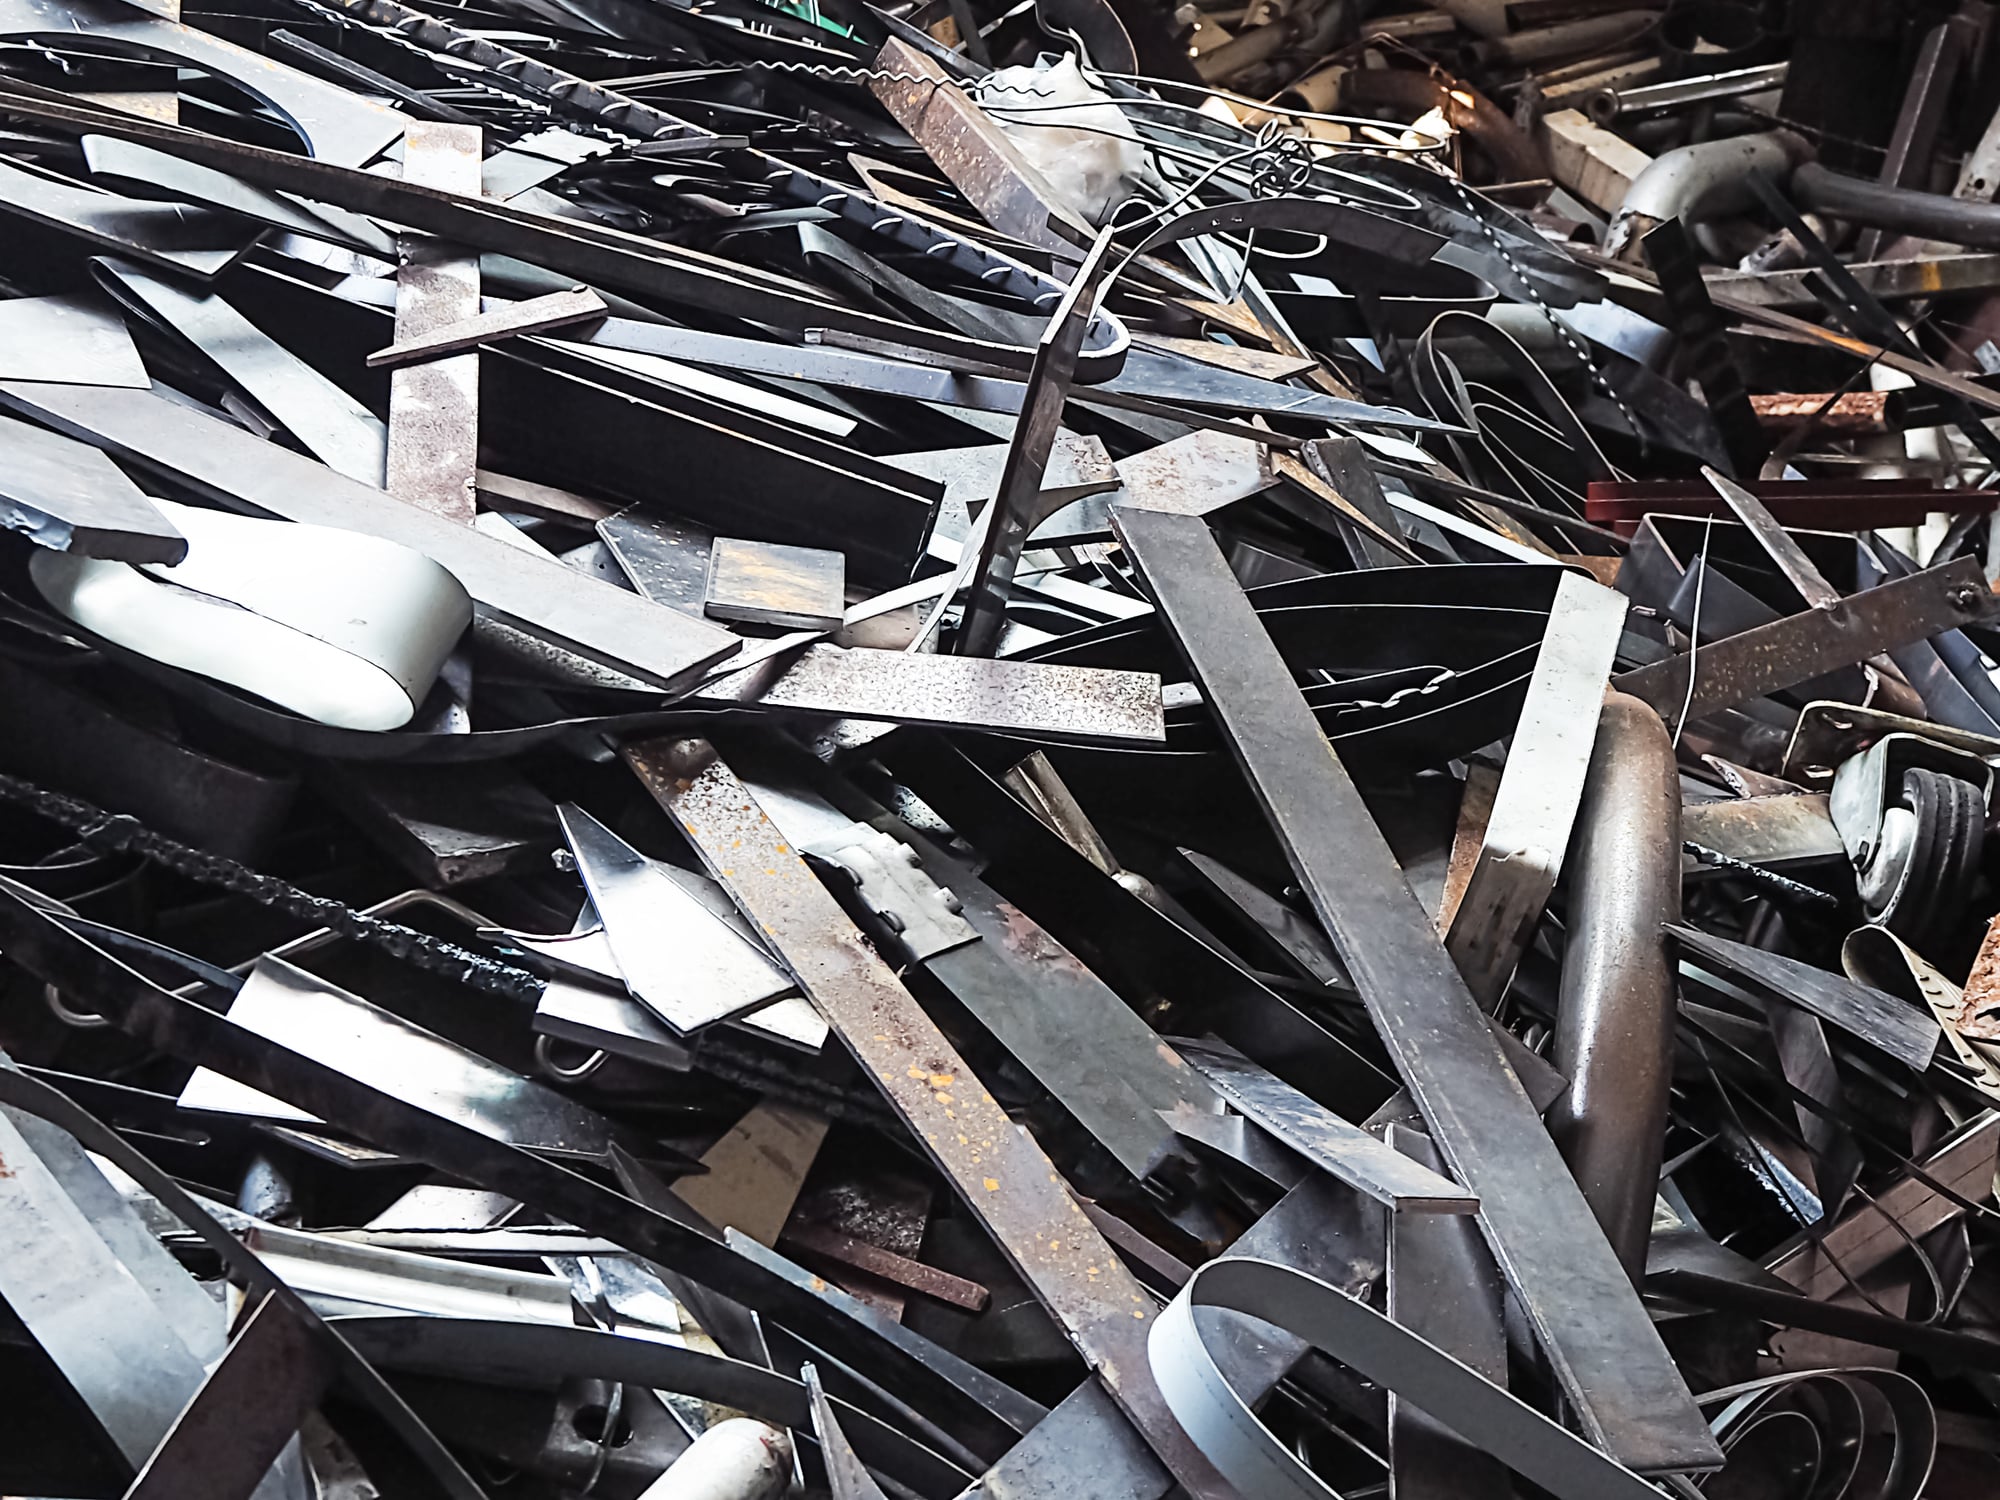 We all Benefit from Metal Recycling | Scrapware, recycling industry